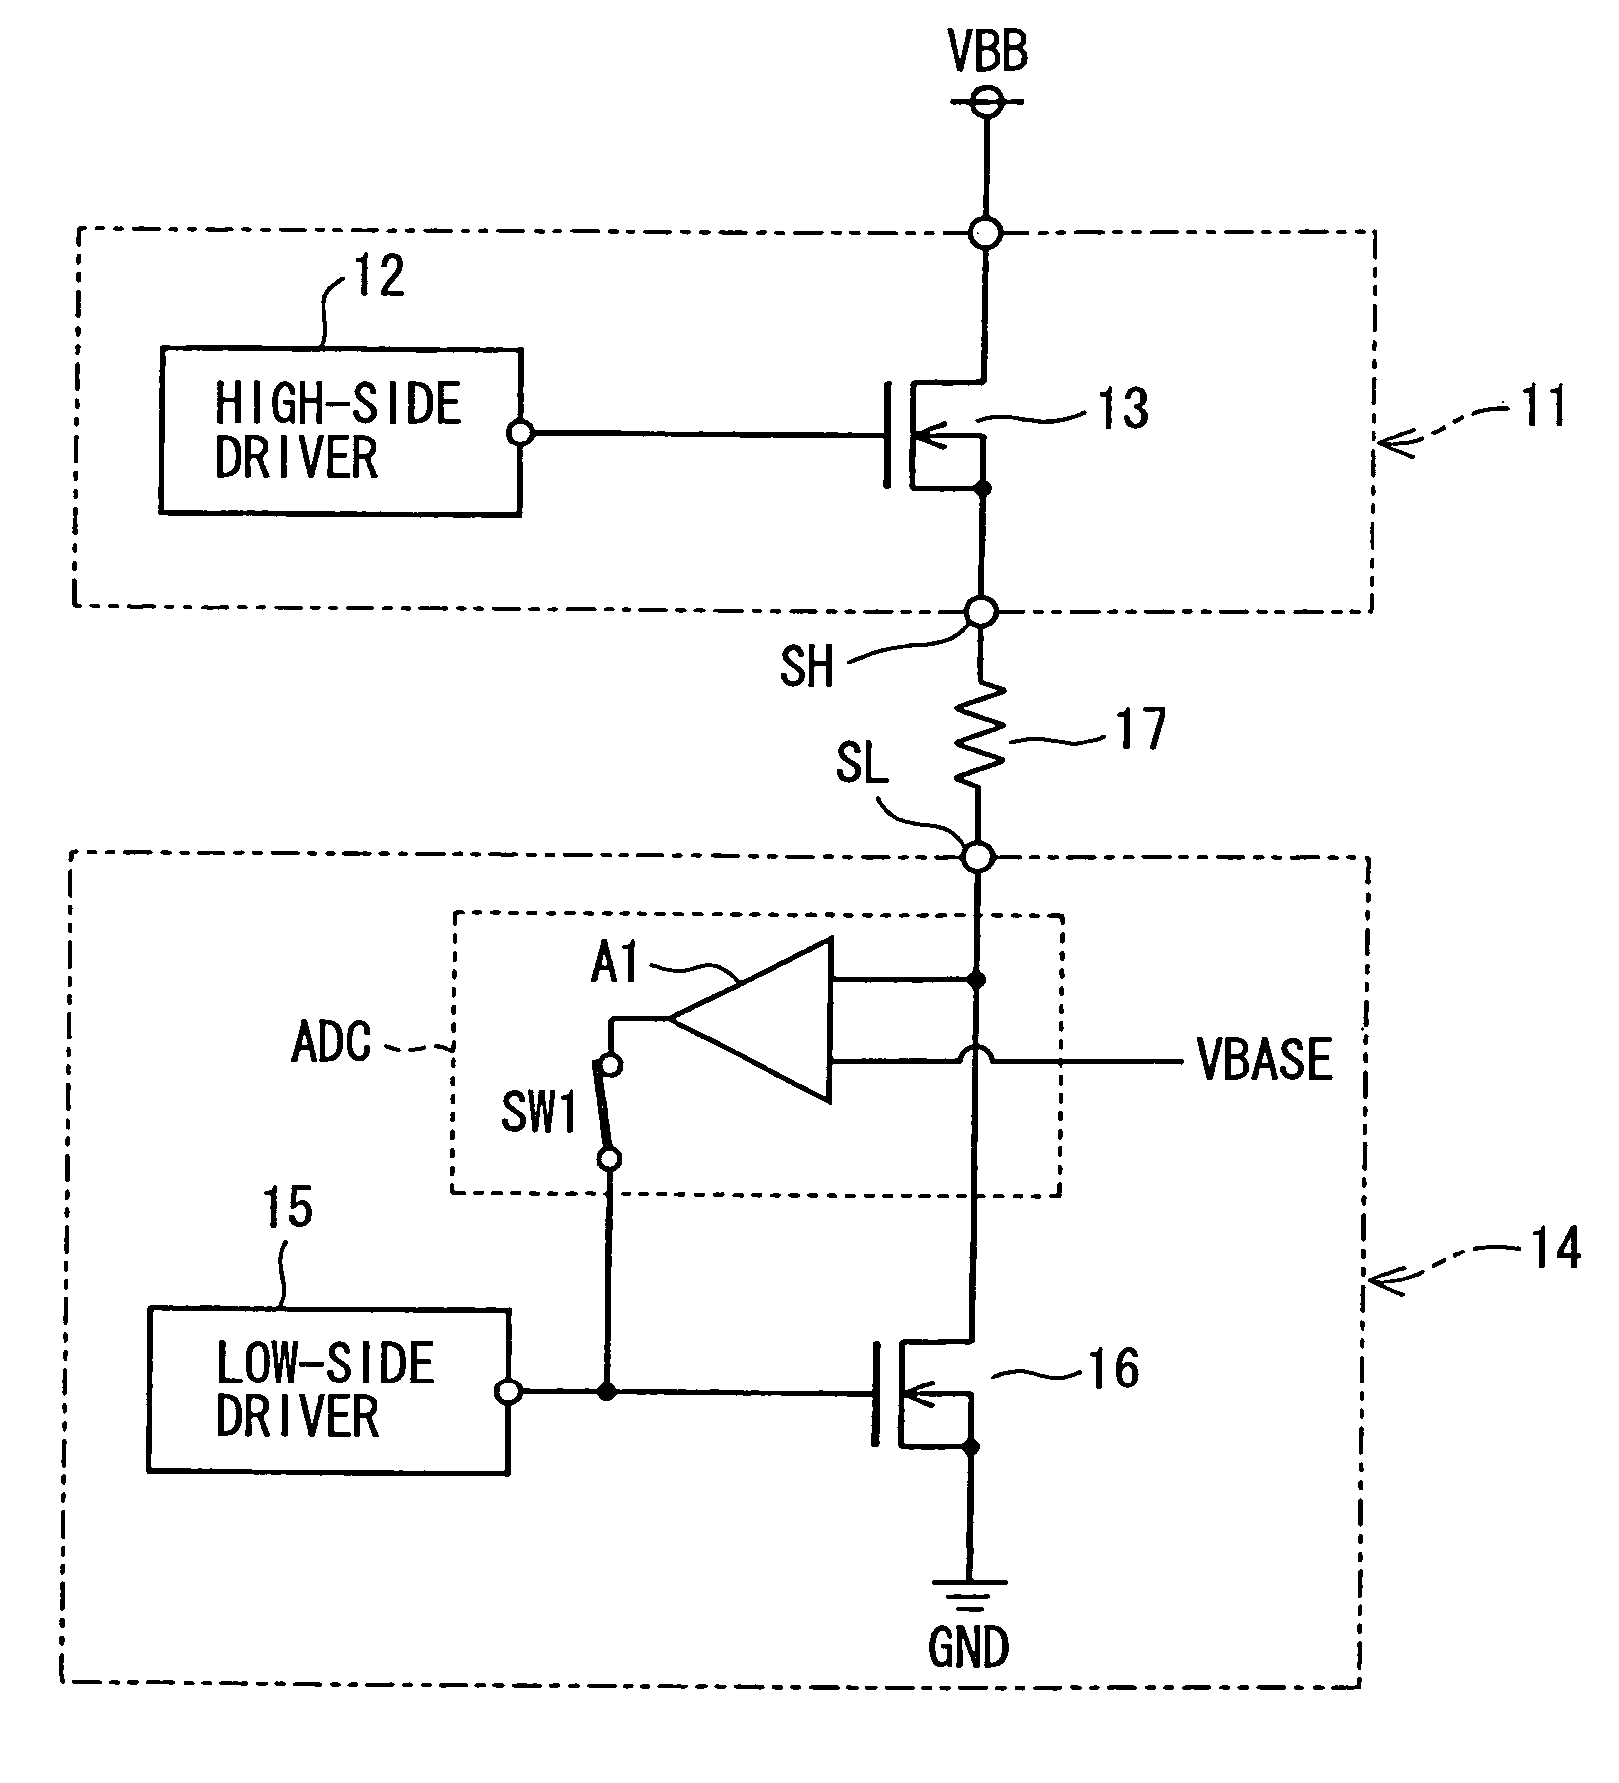 Semiconductor device for driving a load